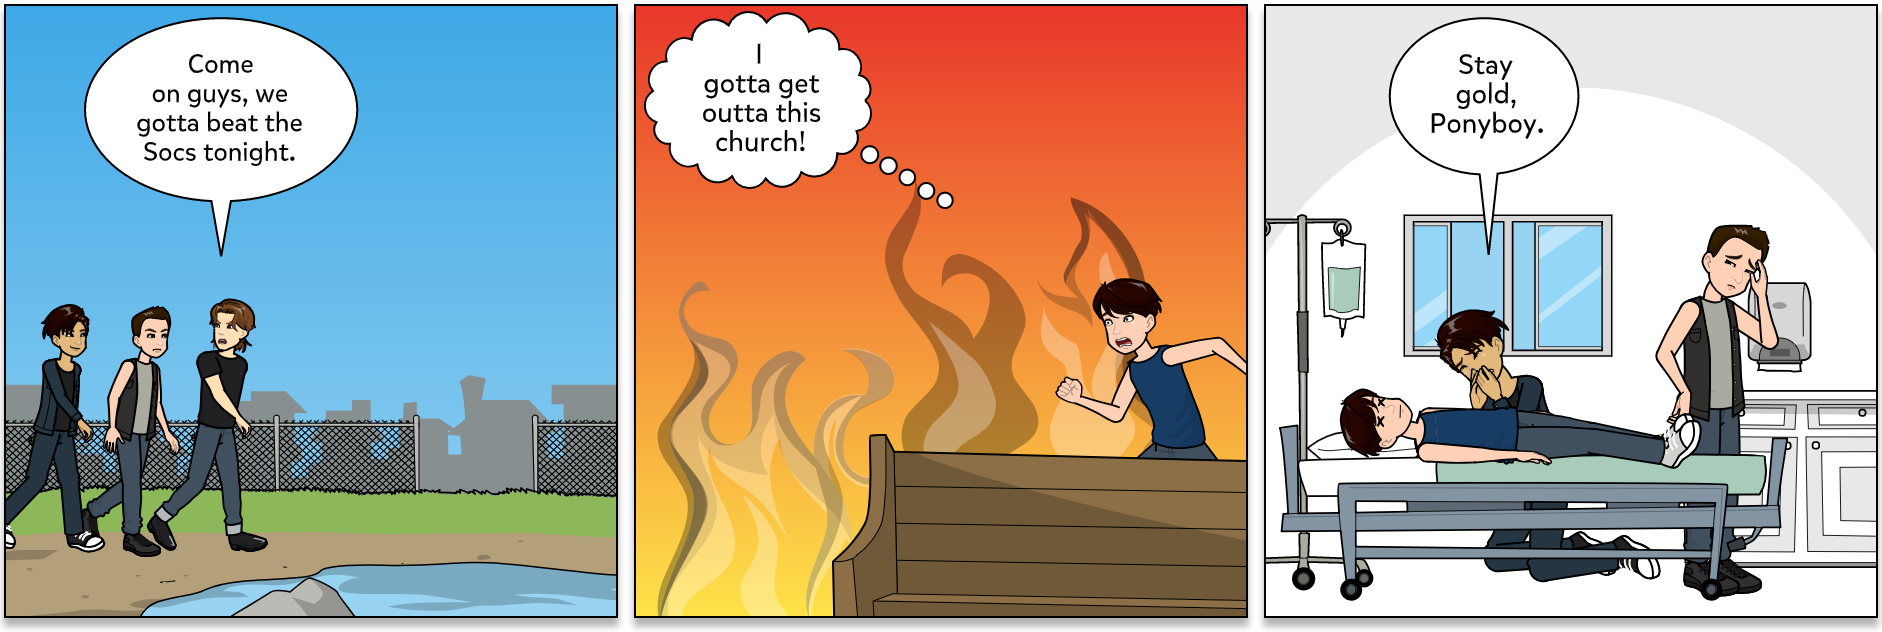 Image shows a three panel comic of the story of The Outsiders.